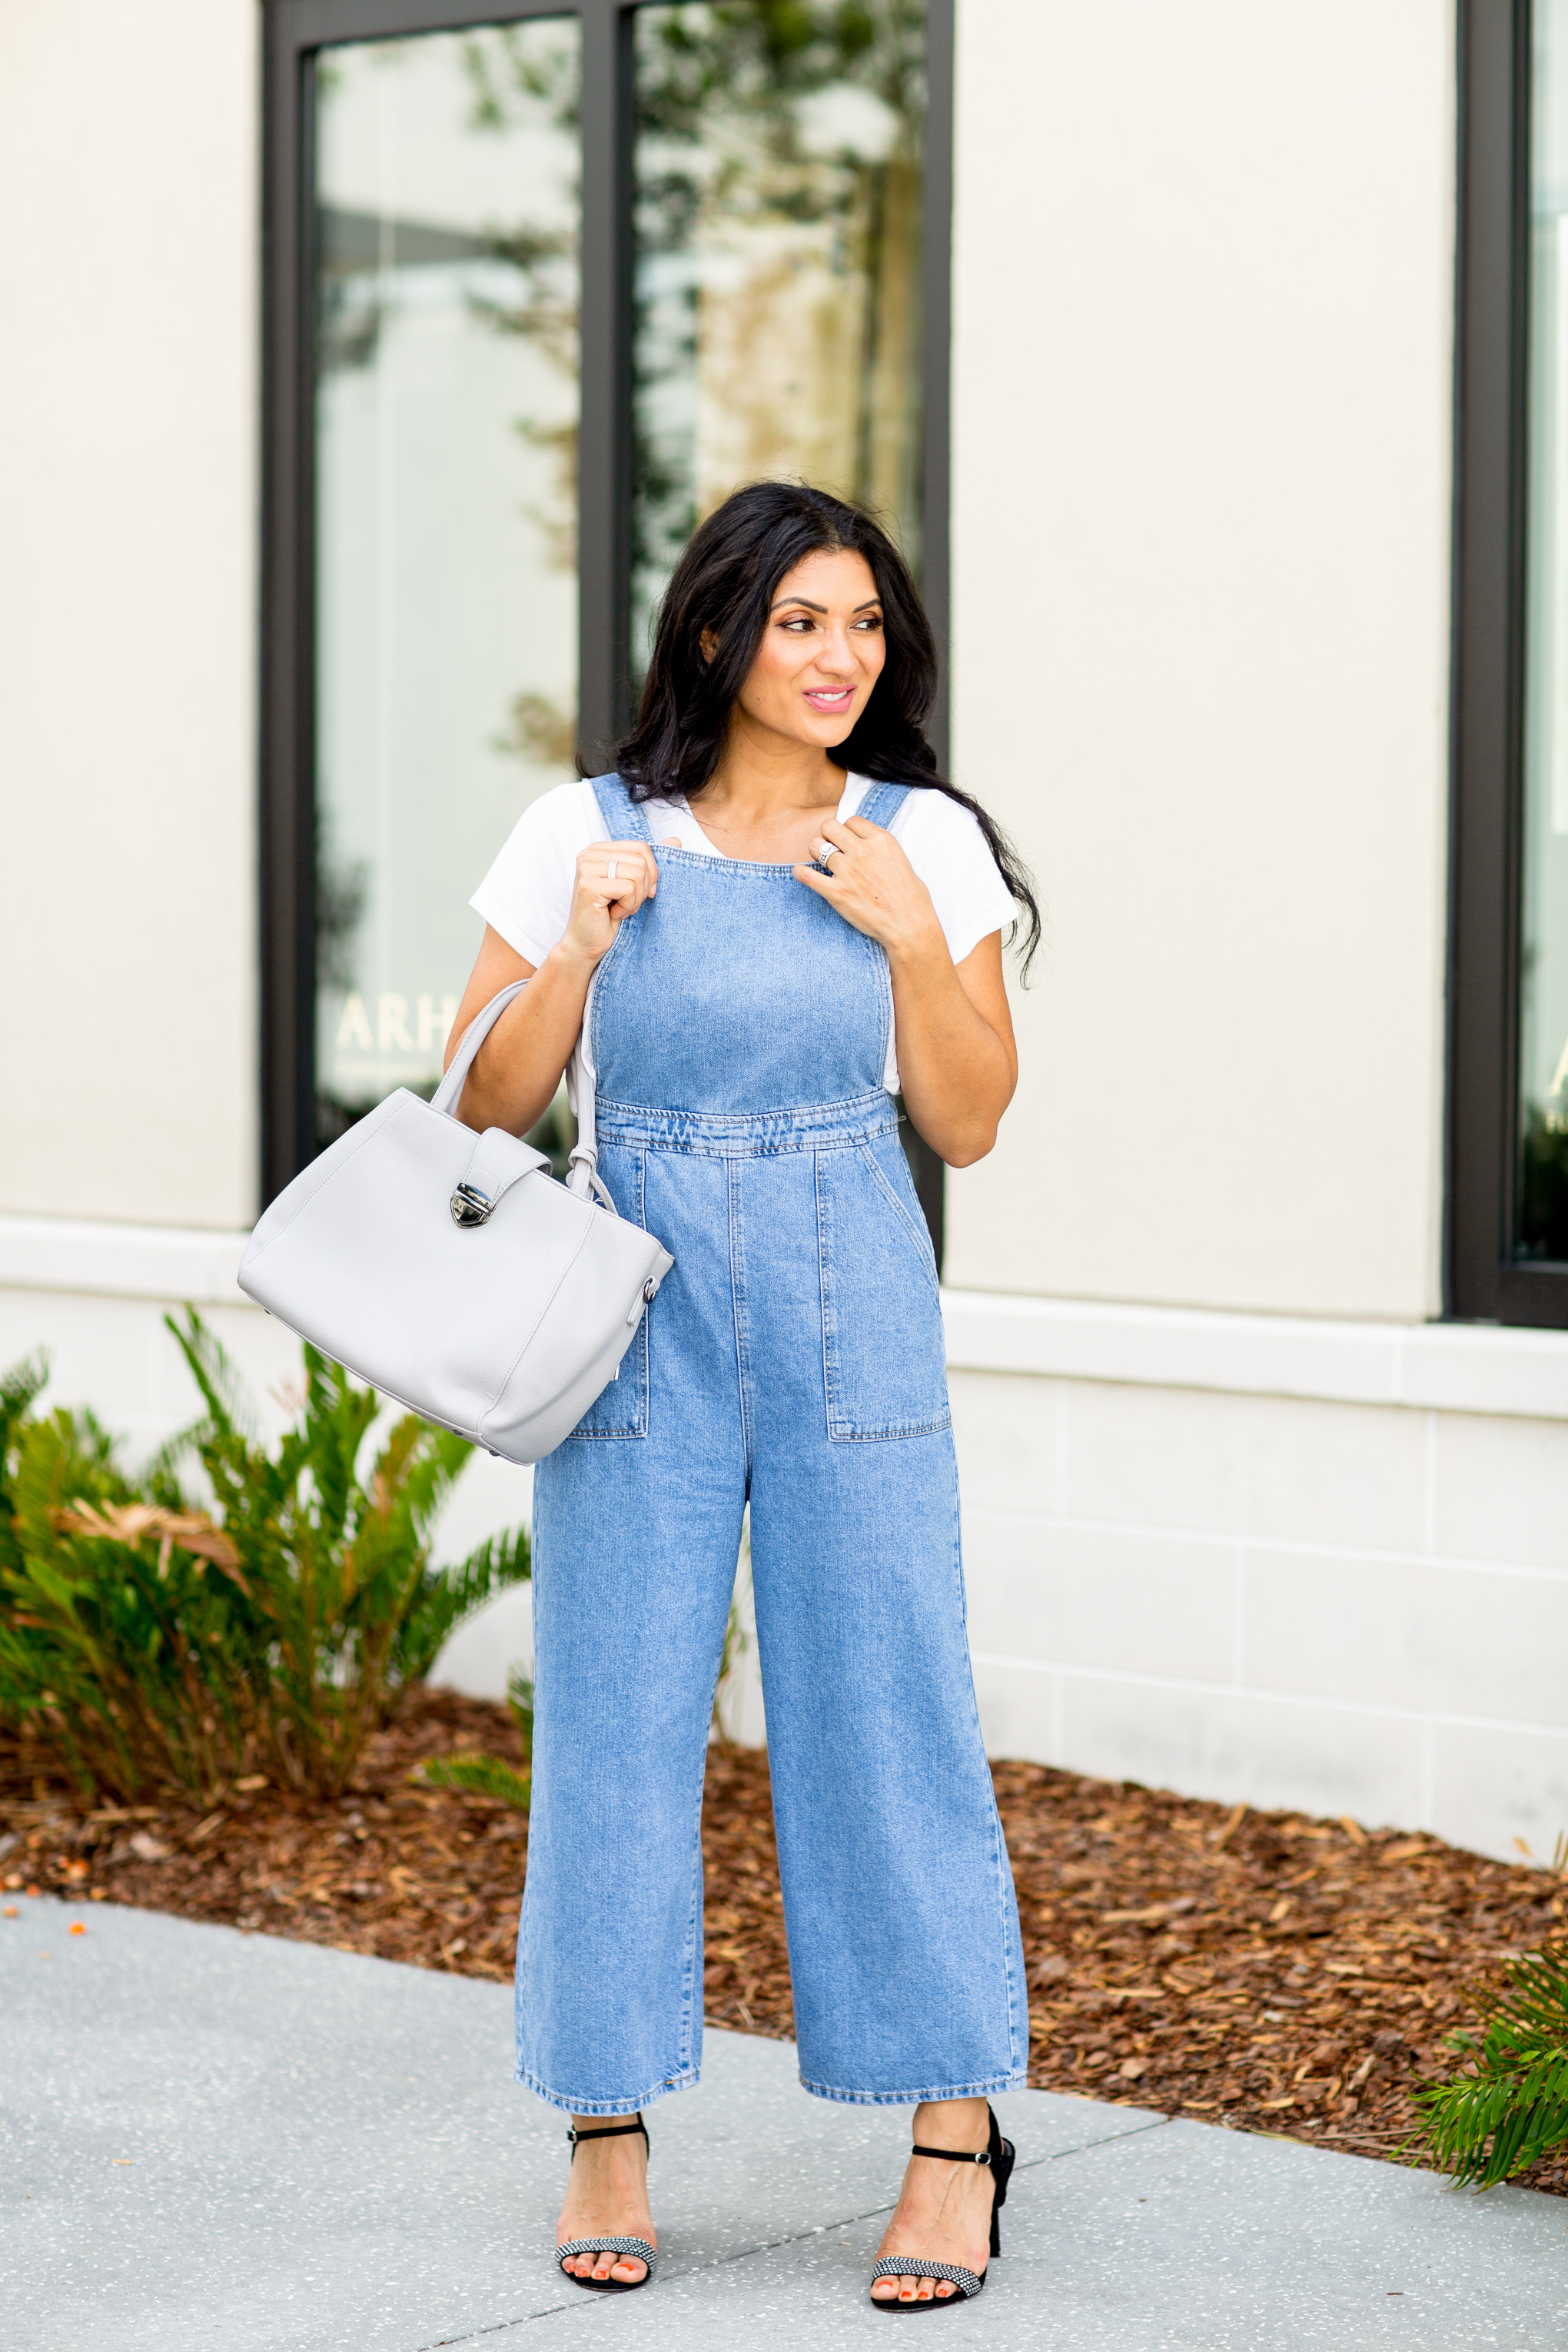 Overalls for summer? Trust me you NEED to try them. Orange County Blogger Debbie Savage is sharing why you need overalls for summer and how to style them here! Click here to see more!